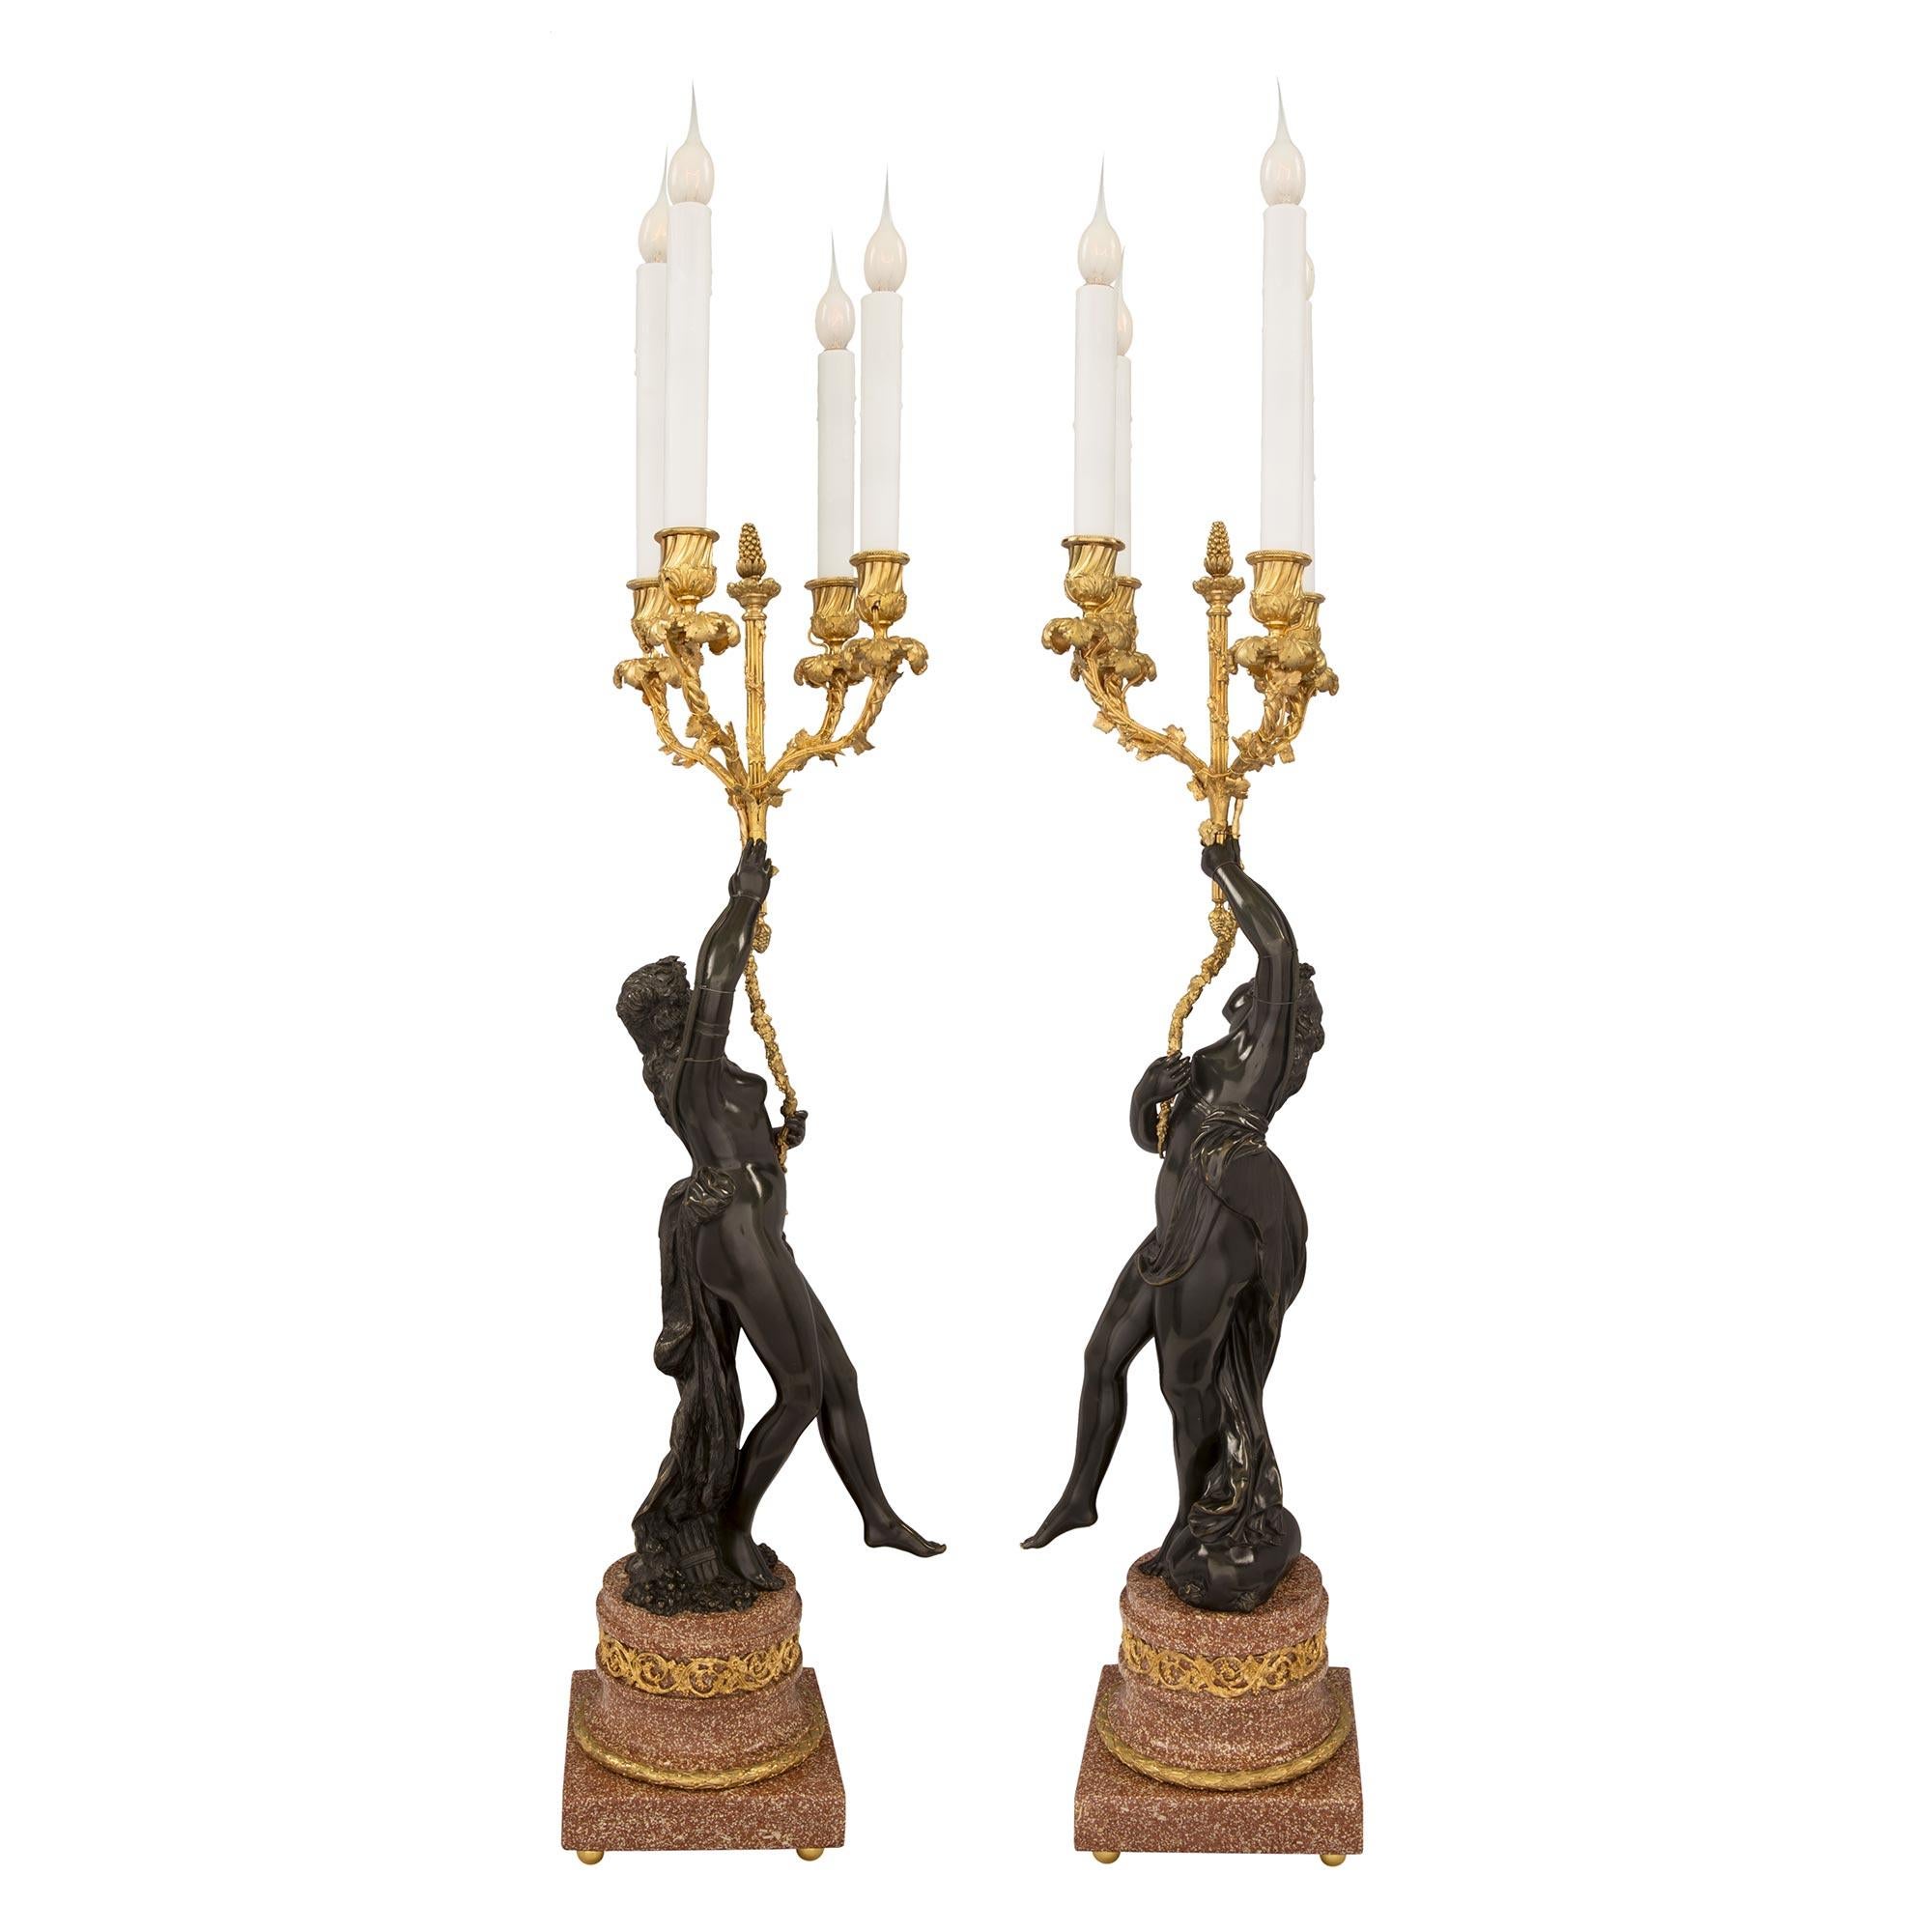 A stunning and high quality true pair of French 19th century Louis XVI st. patinated bronze, ormolu and Porphyry electrified candelabra lamps. Each candelabra is raised by elegant ormolu ball feet below the Porphyry base. The bases display square